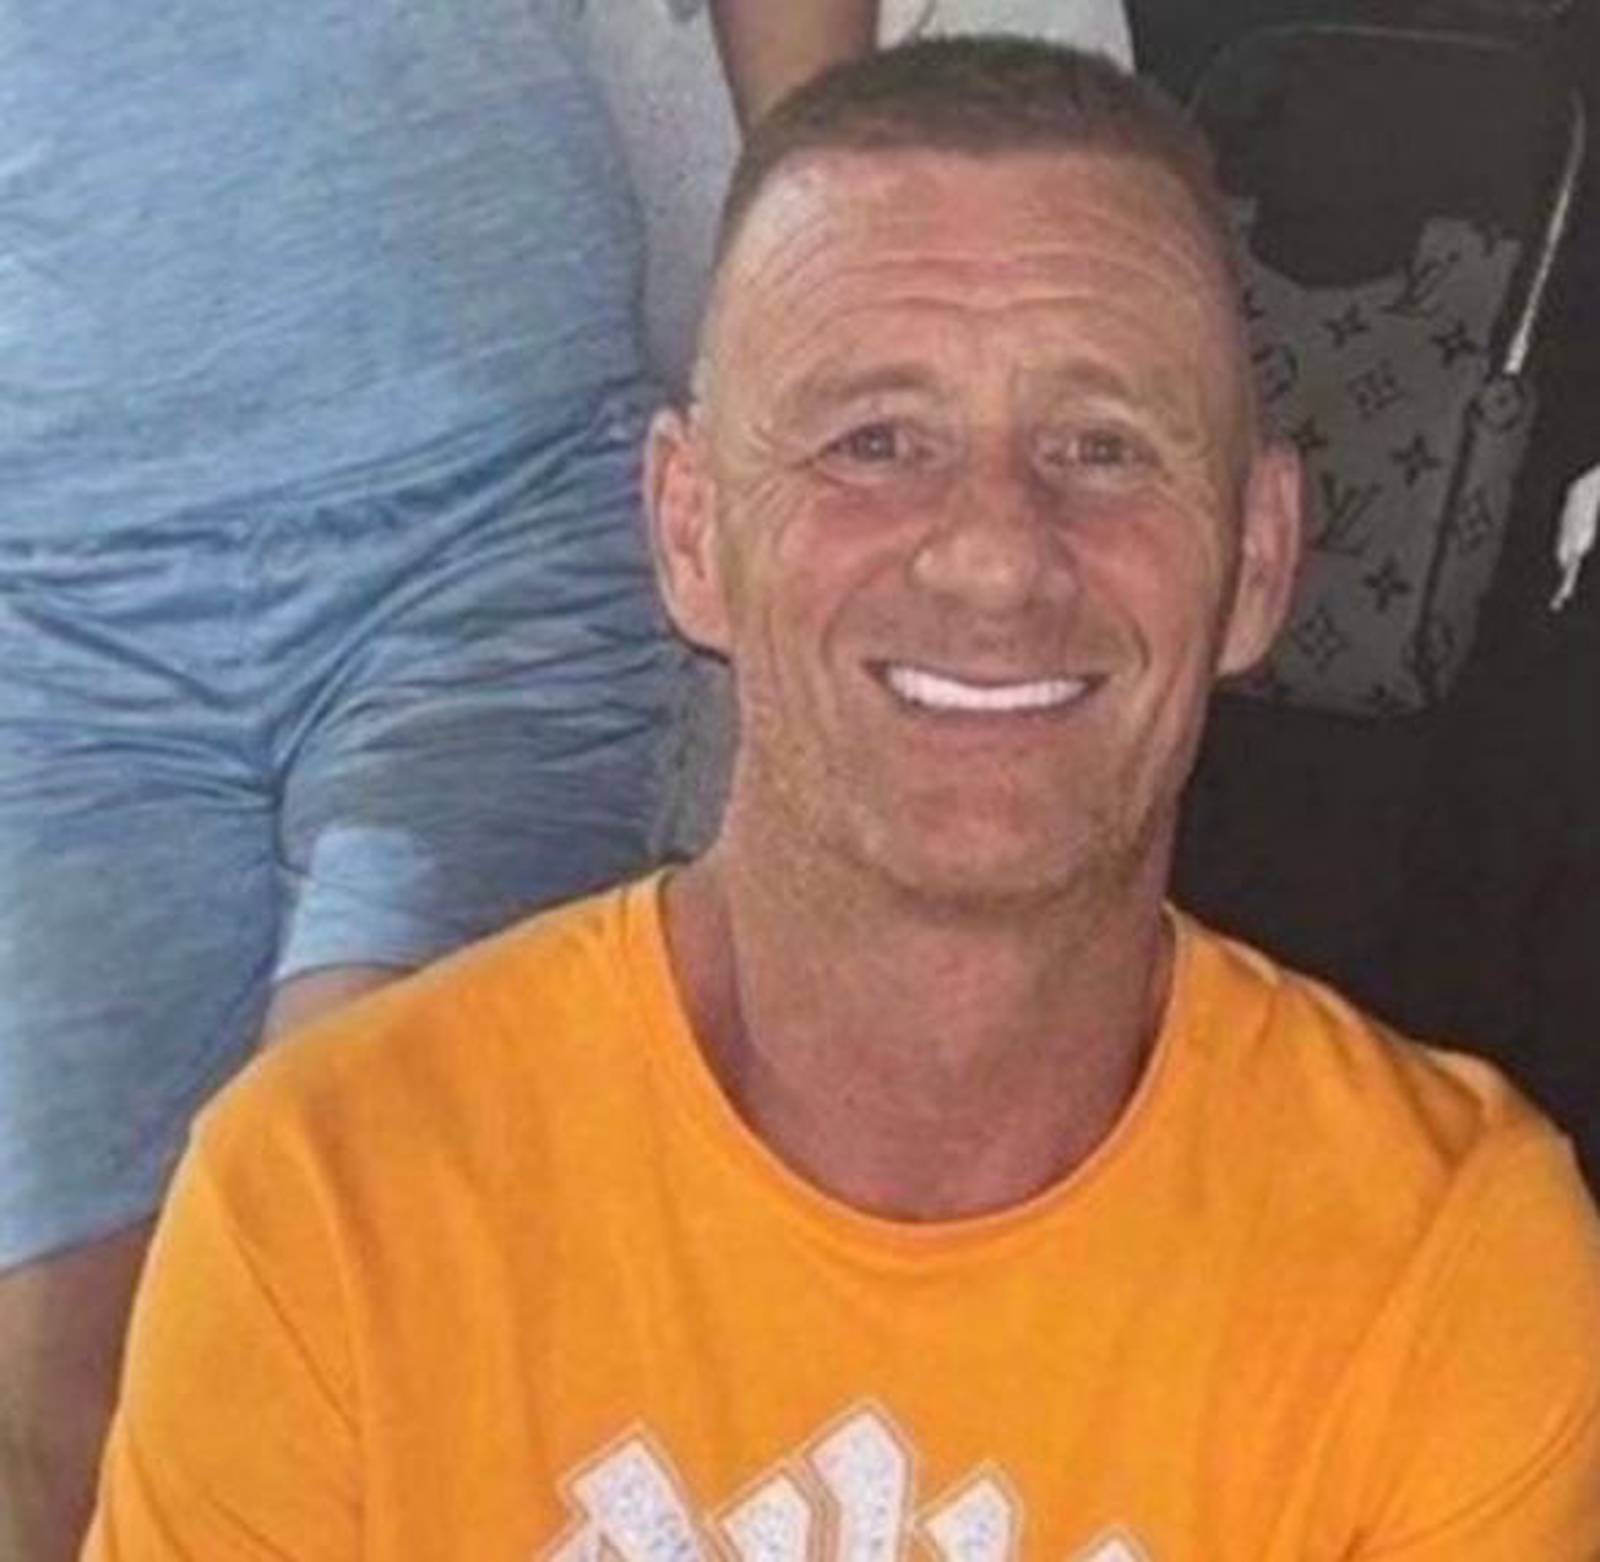 Jason Hennessy snr who died after shooting in Blanchardstown